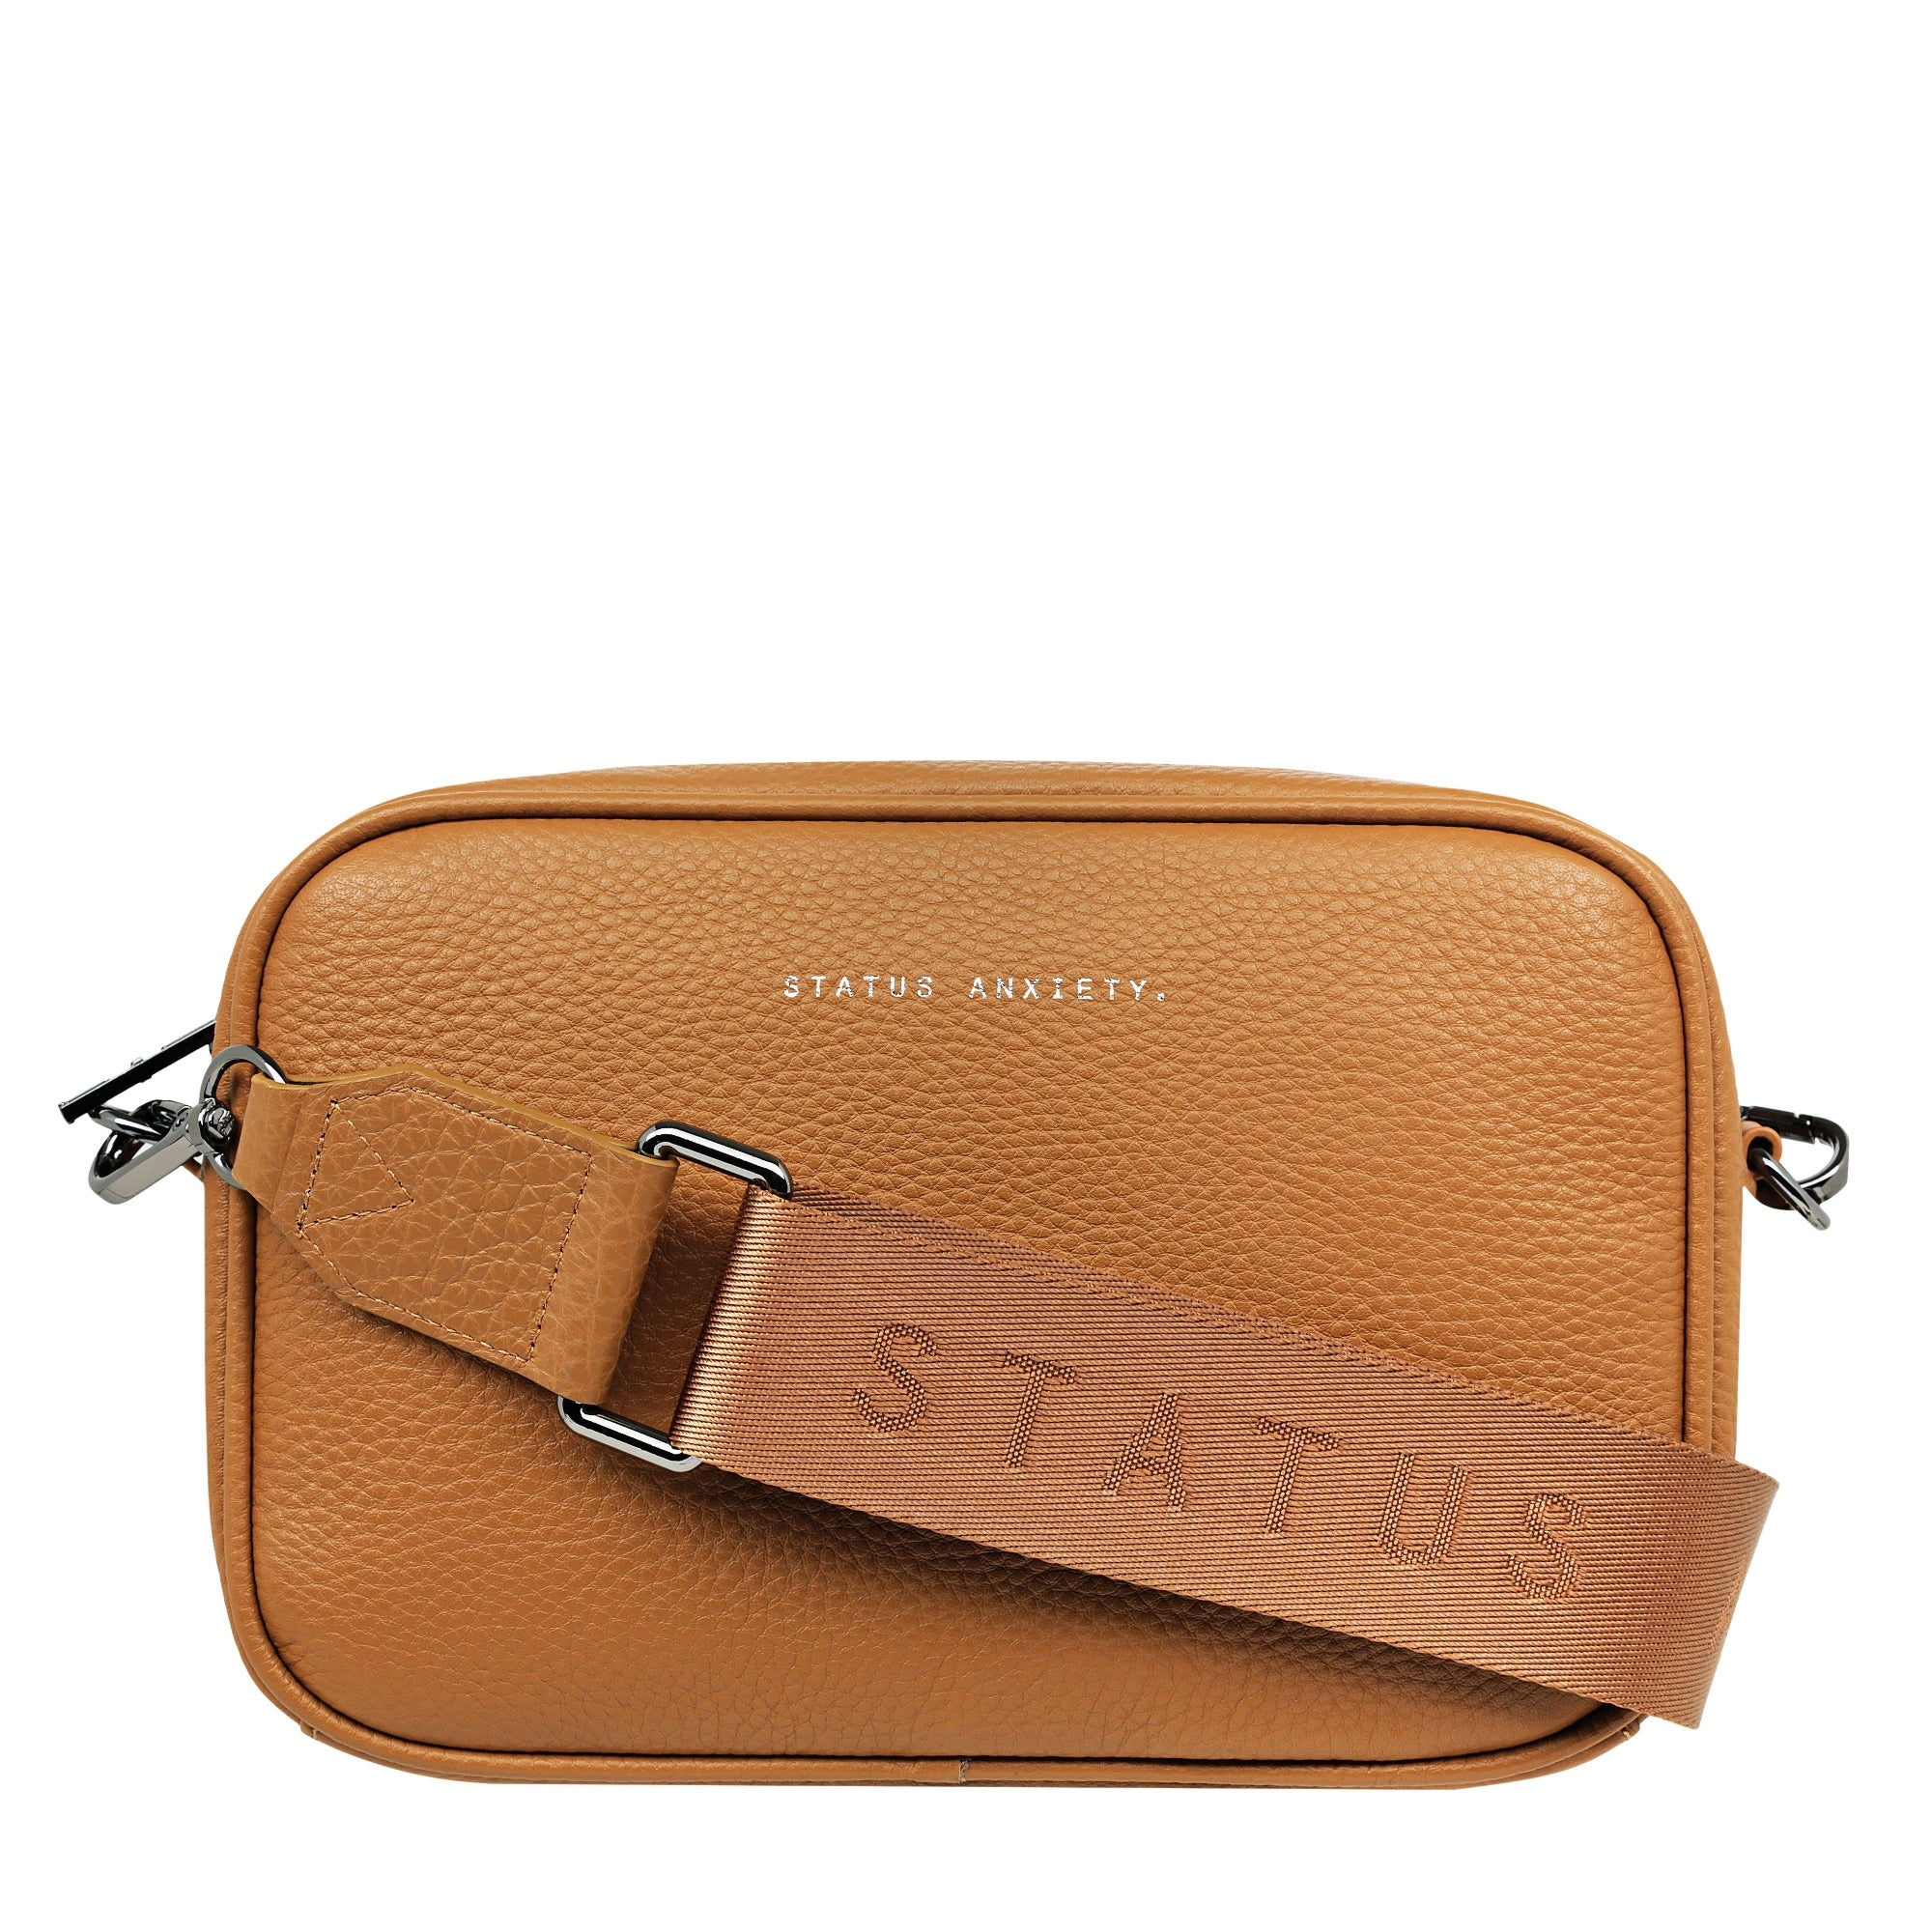 Status Anxiety Plunder with Webbed Strap [COLOUR:Tan]